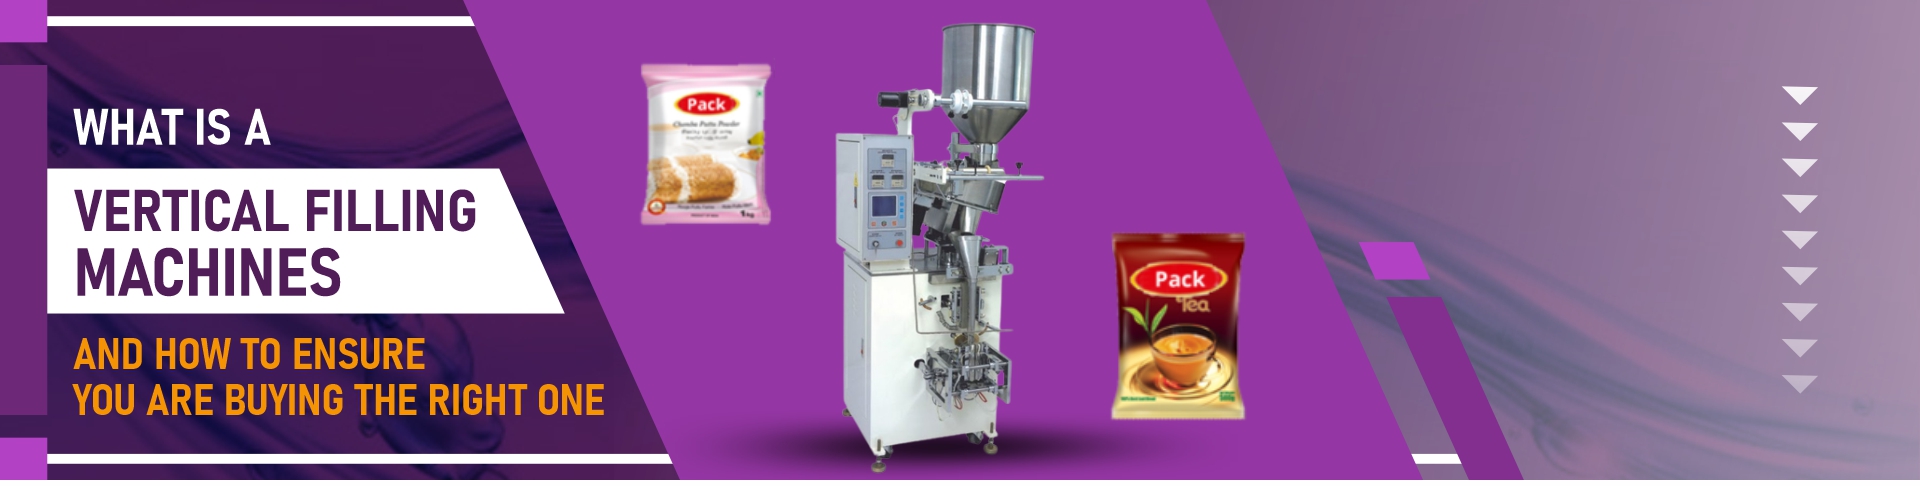 What is a Vertical Filling Machines and How To Ensure You Are Buying The Right One